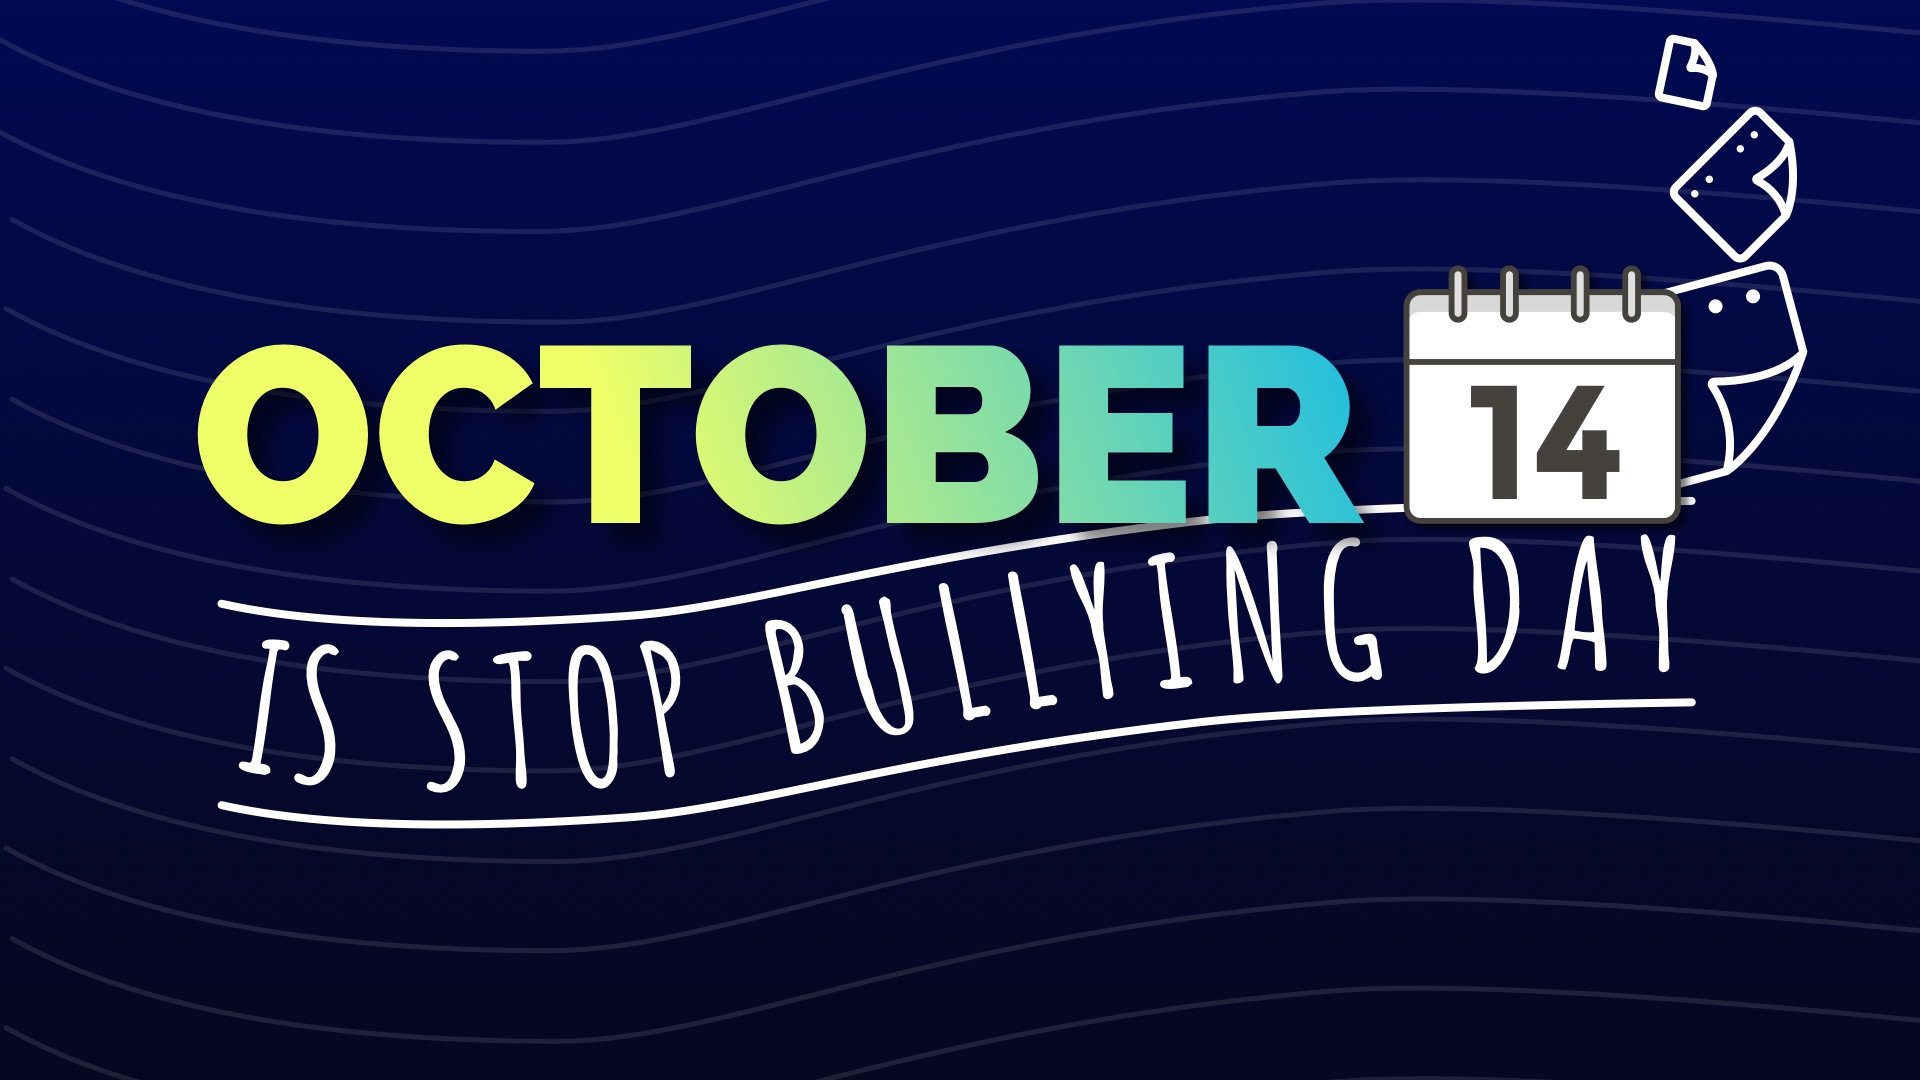 20 Free AntiBullying Posters For Schools